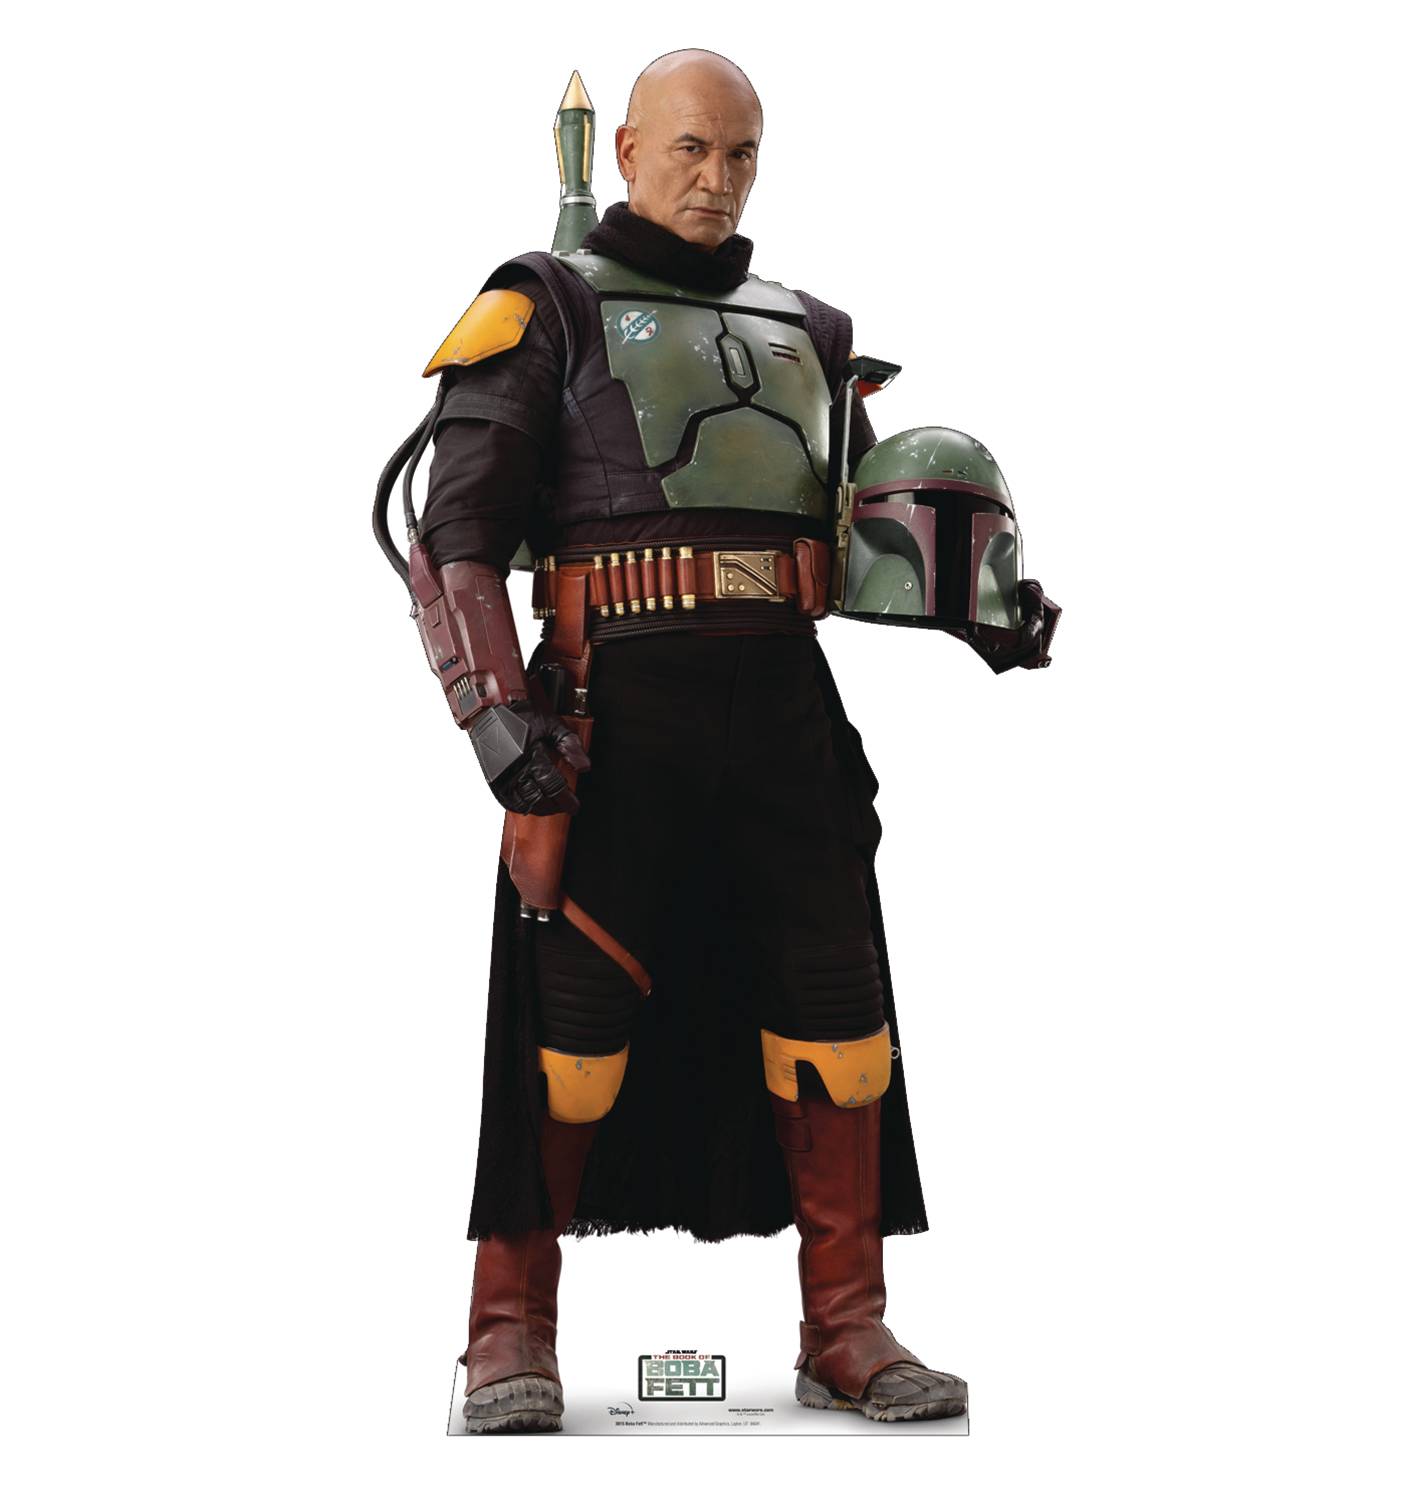 STAR WARS BOOK OF BOBA FETT LIFE-SIZE STANDEE (C: 1-1-2) | L.A. Mood Comics and Games